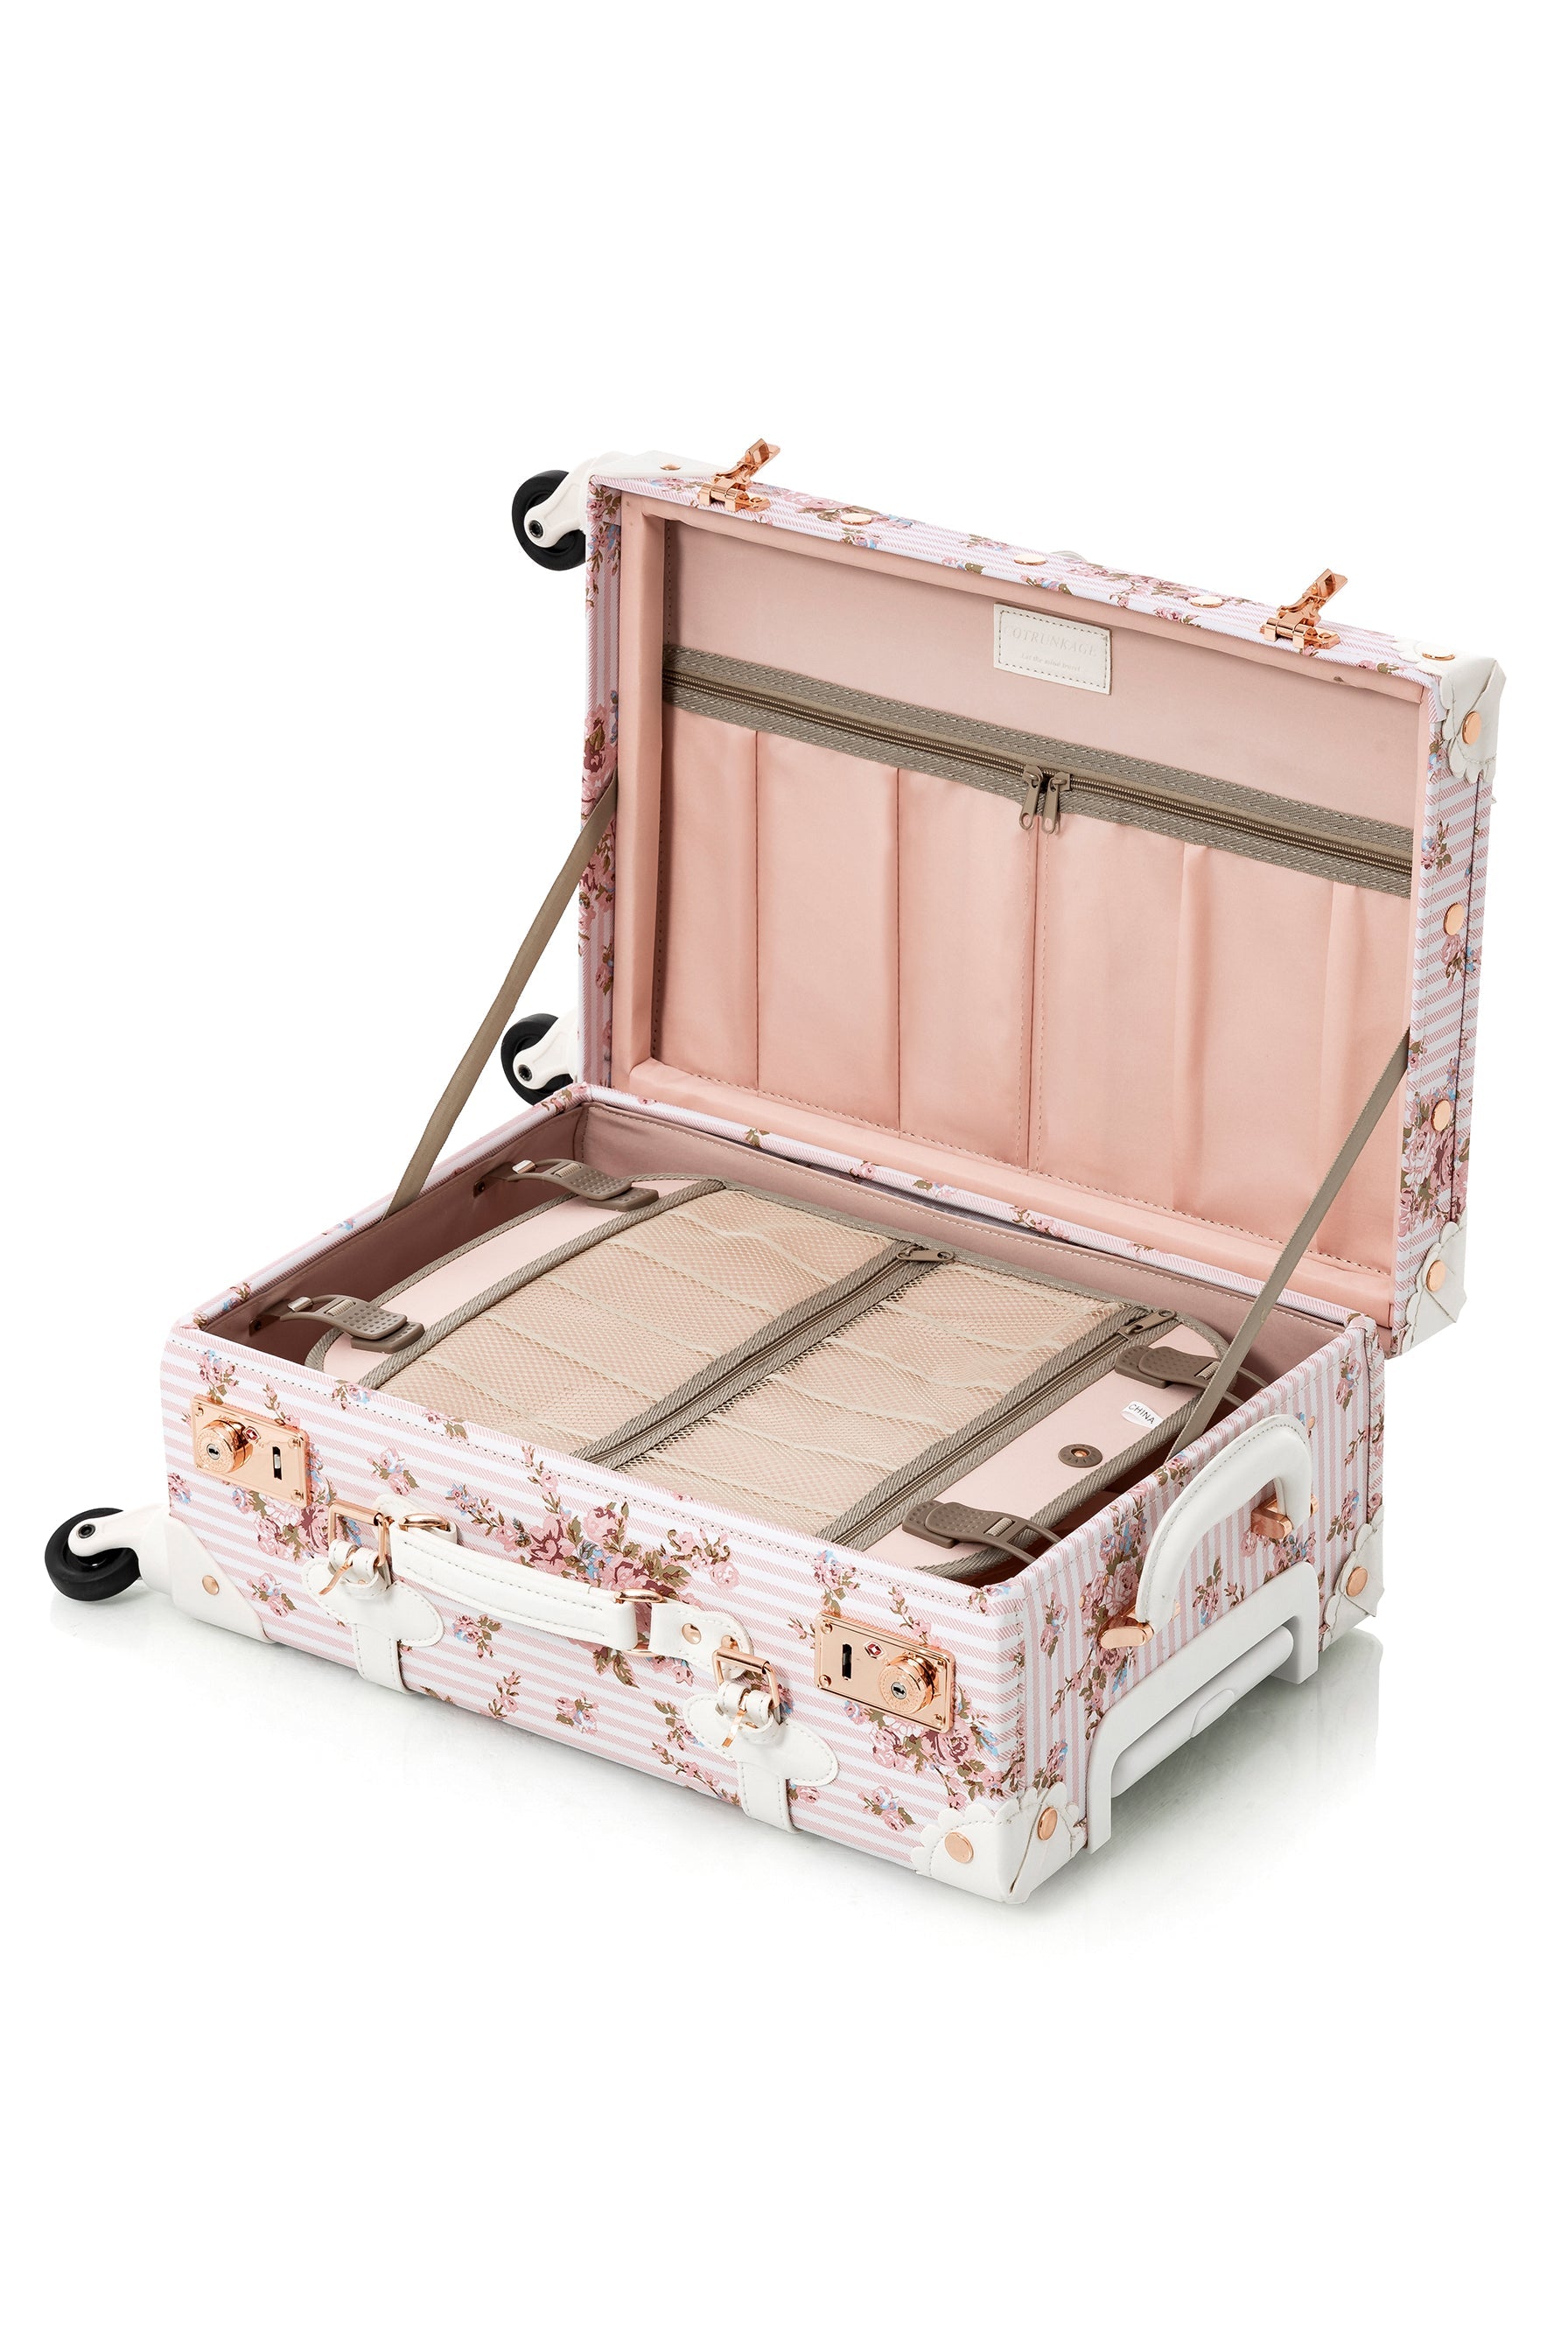 (United States) WildFloral 3 Pieces Luggage Set - Pink Floral's